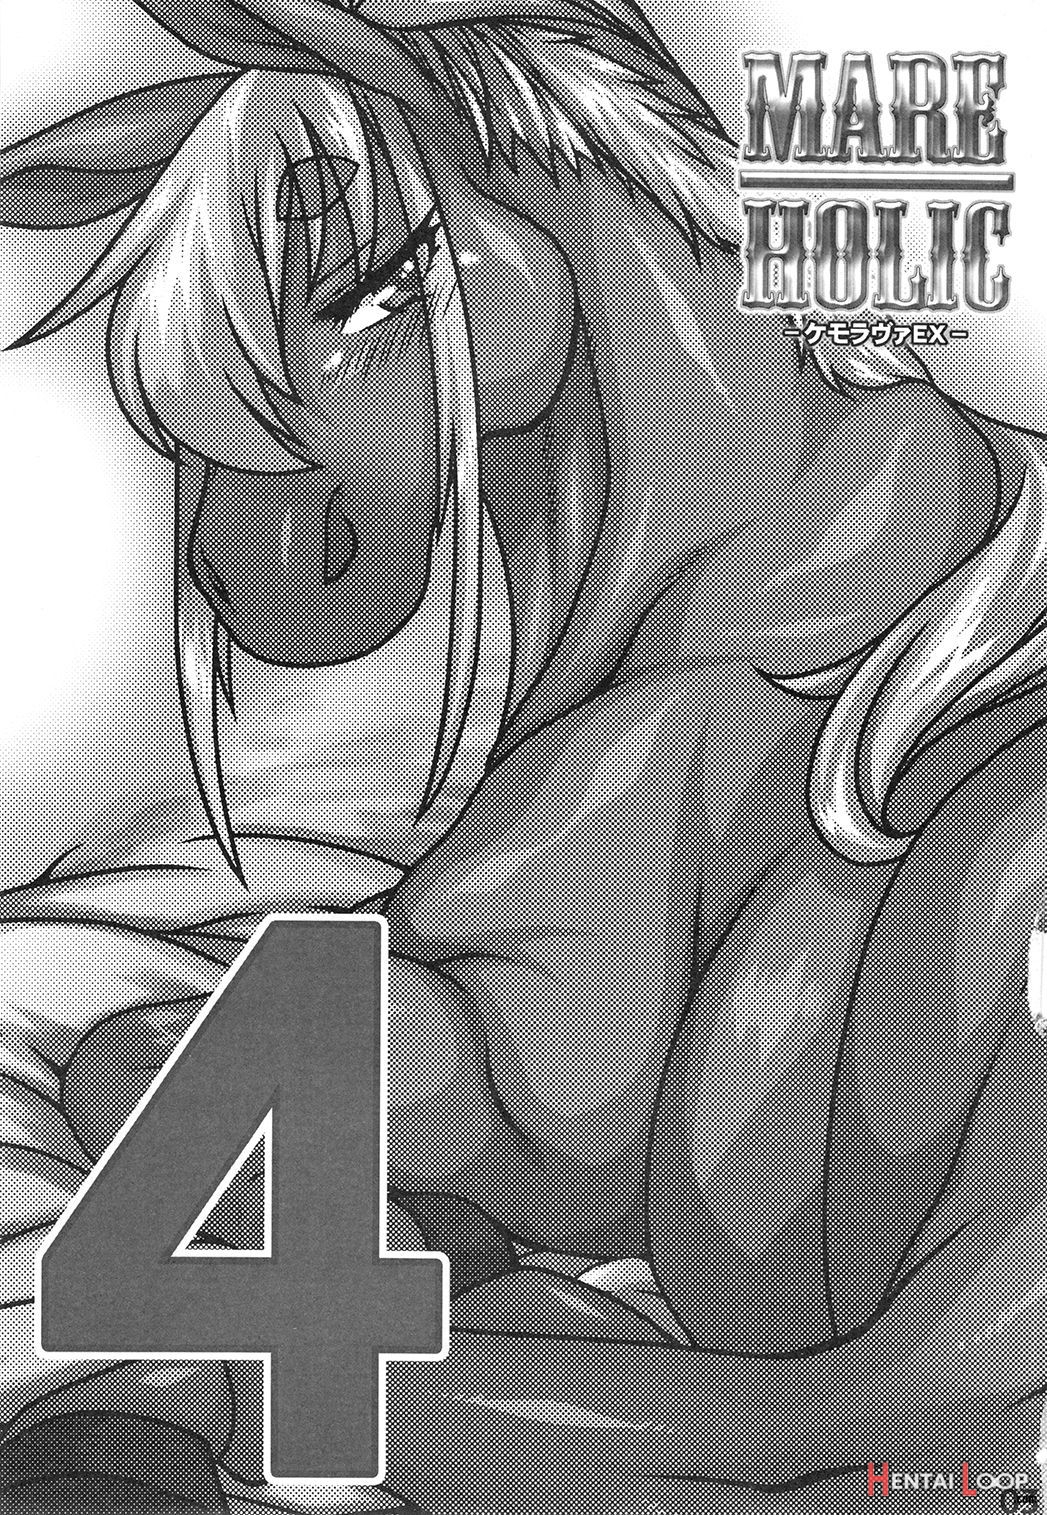 Mare Holic 4 Kemolover Ex Ch 4 + 8 page 2